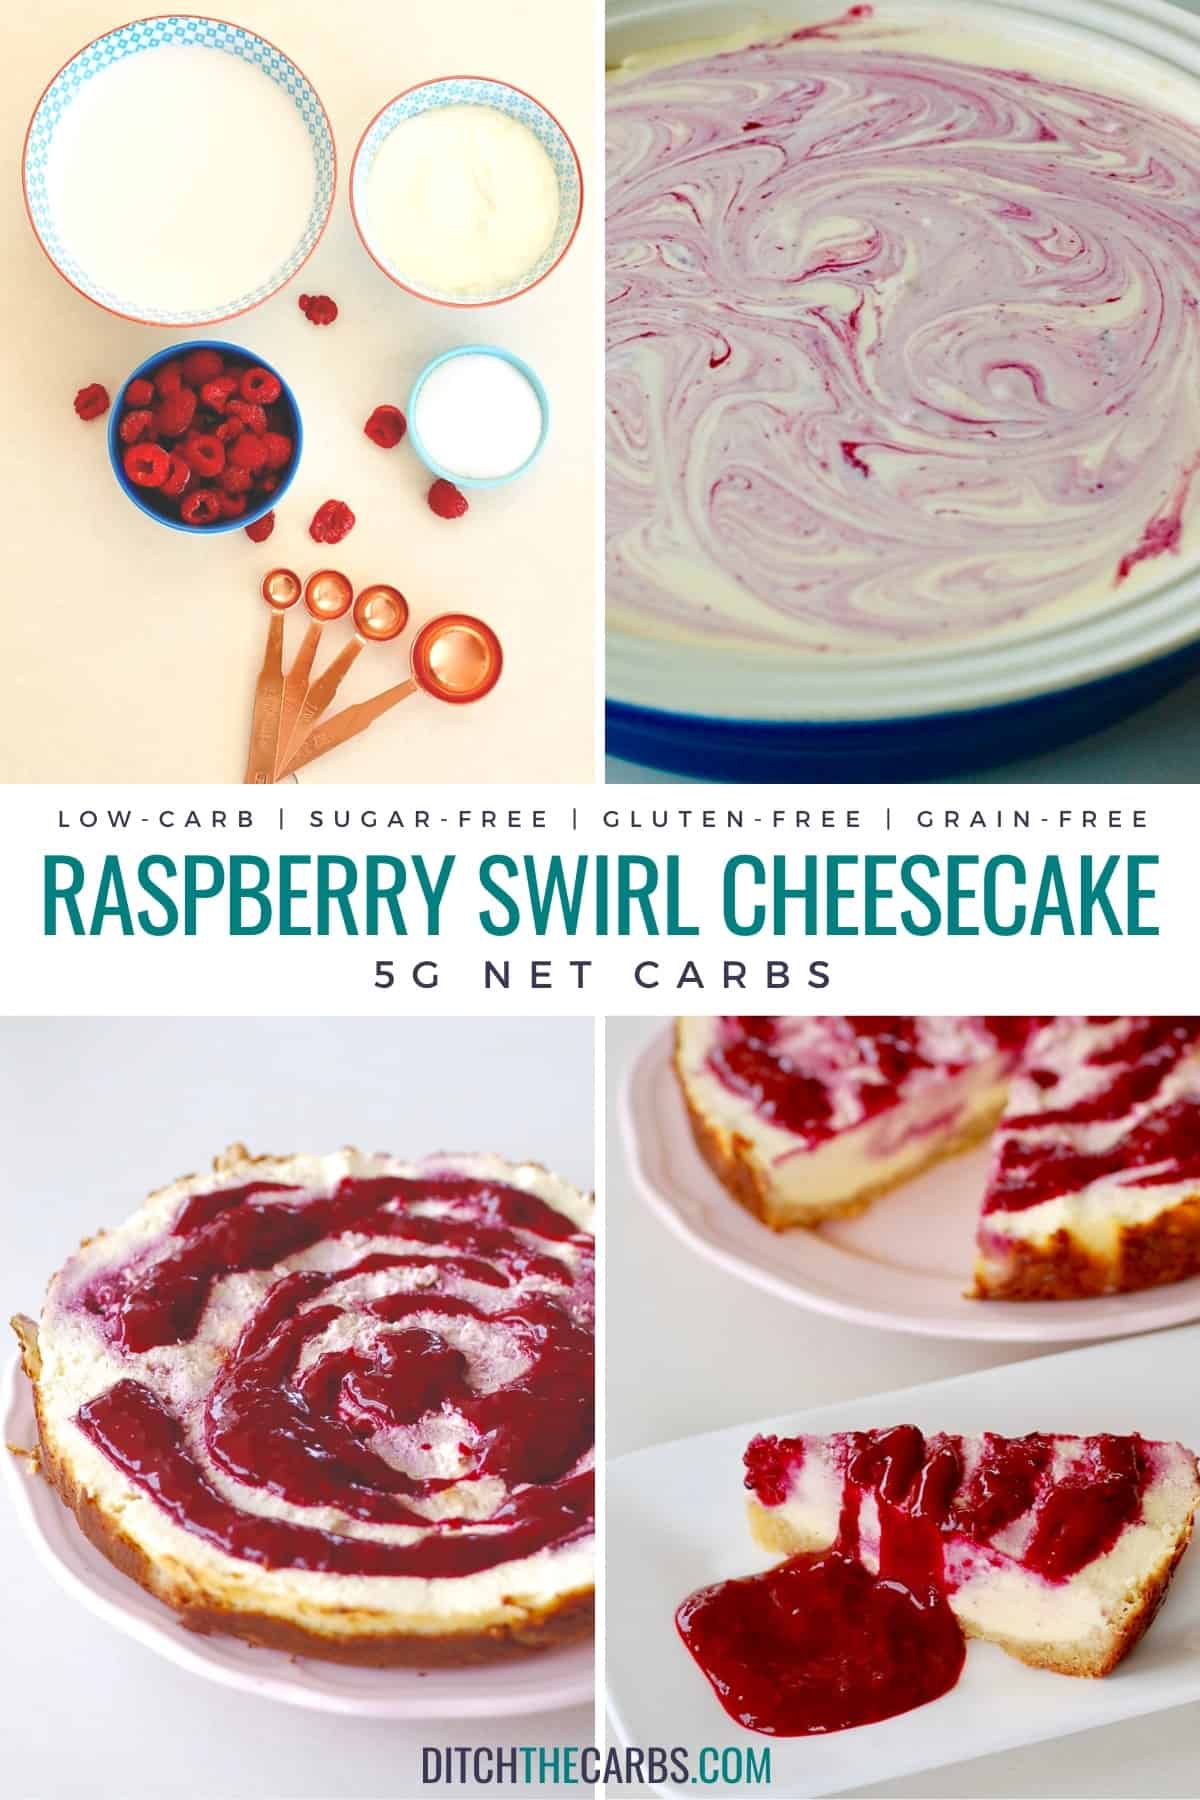 4 process photos from ingredients to final raspberry swirl cheesecake